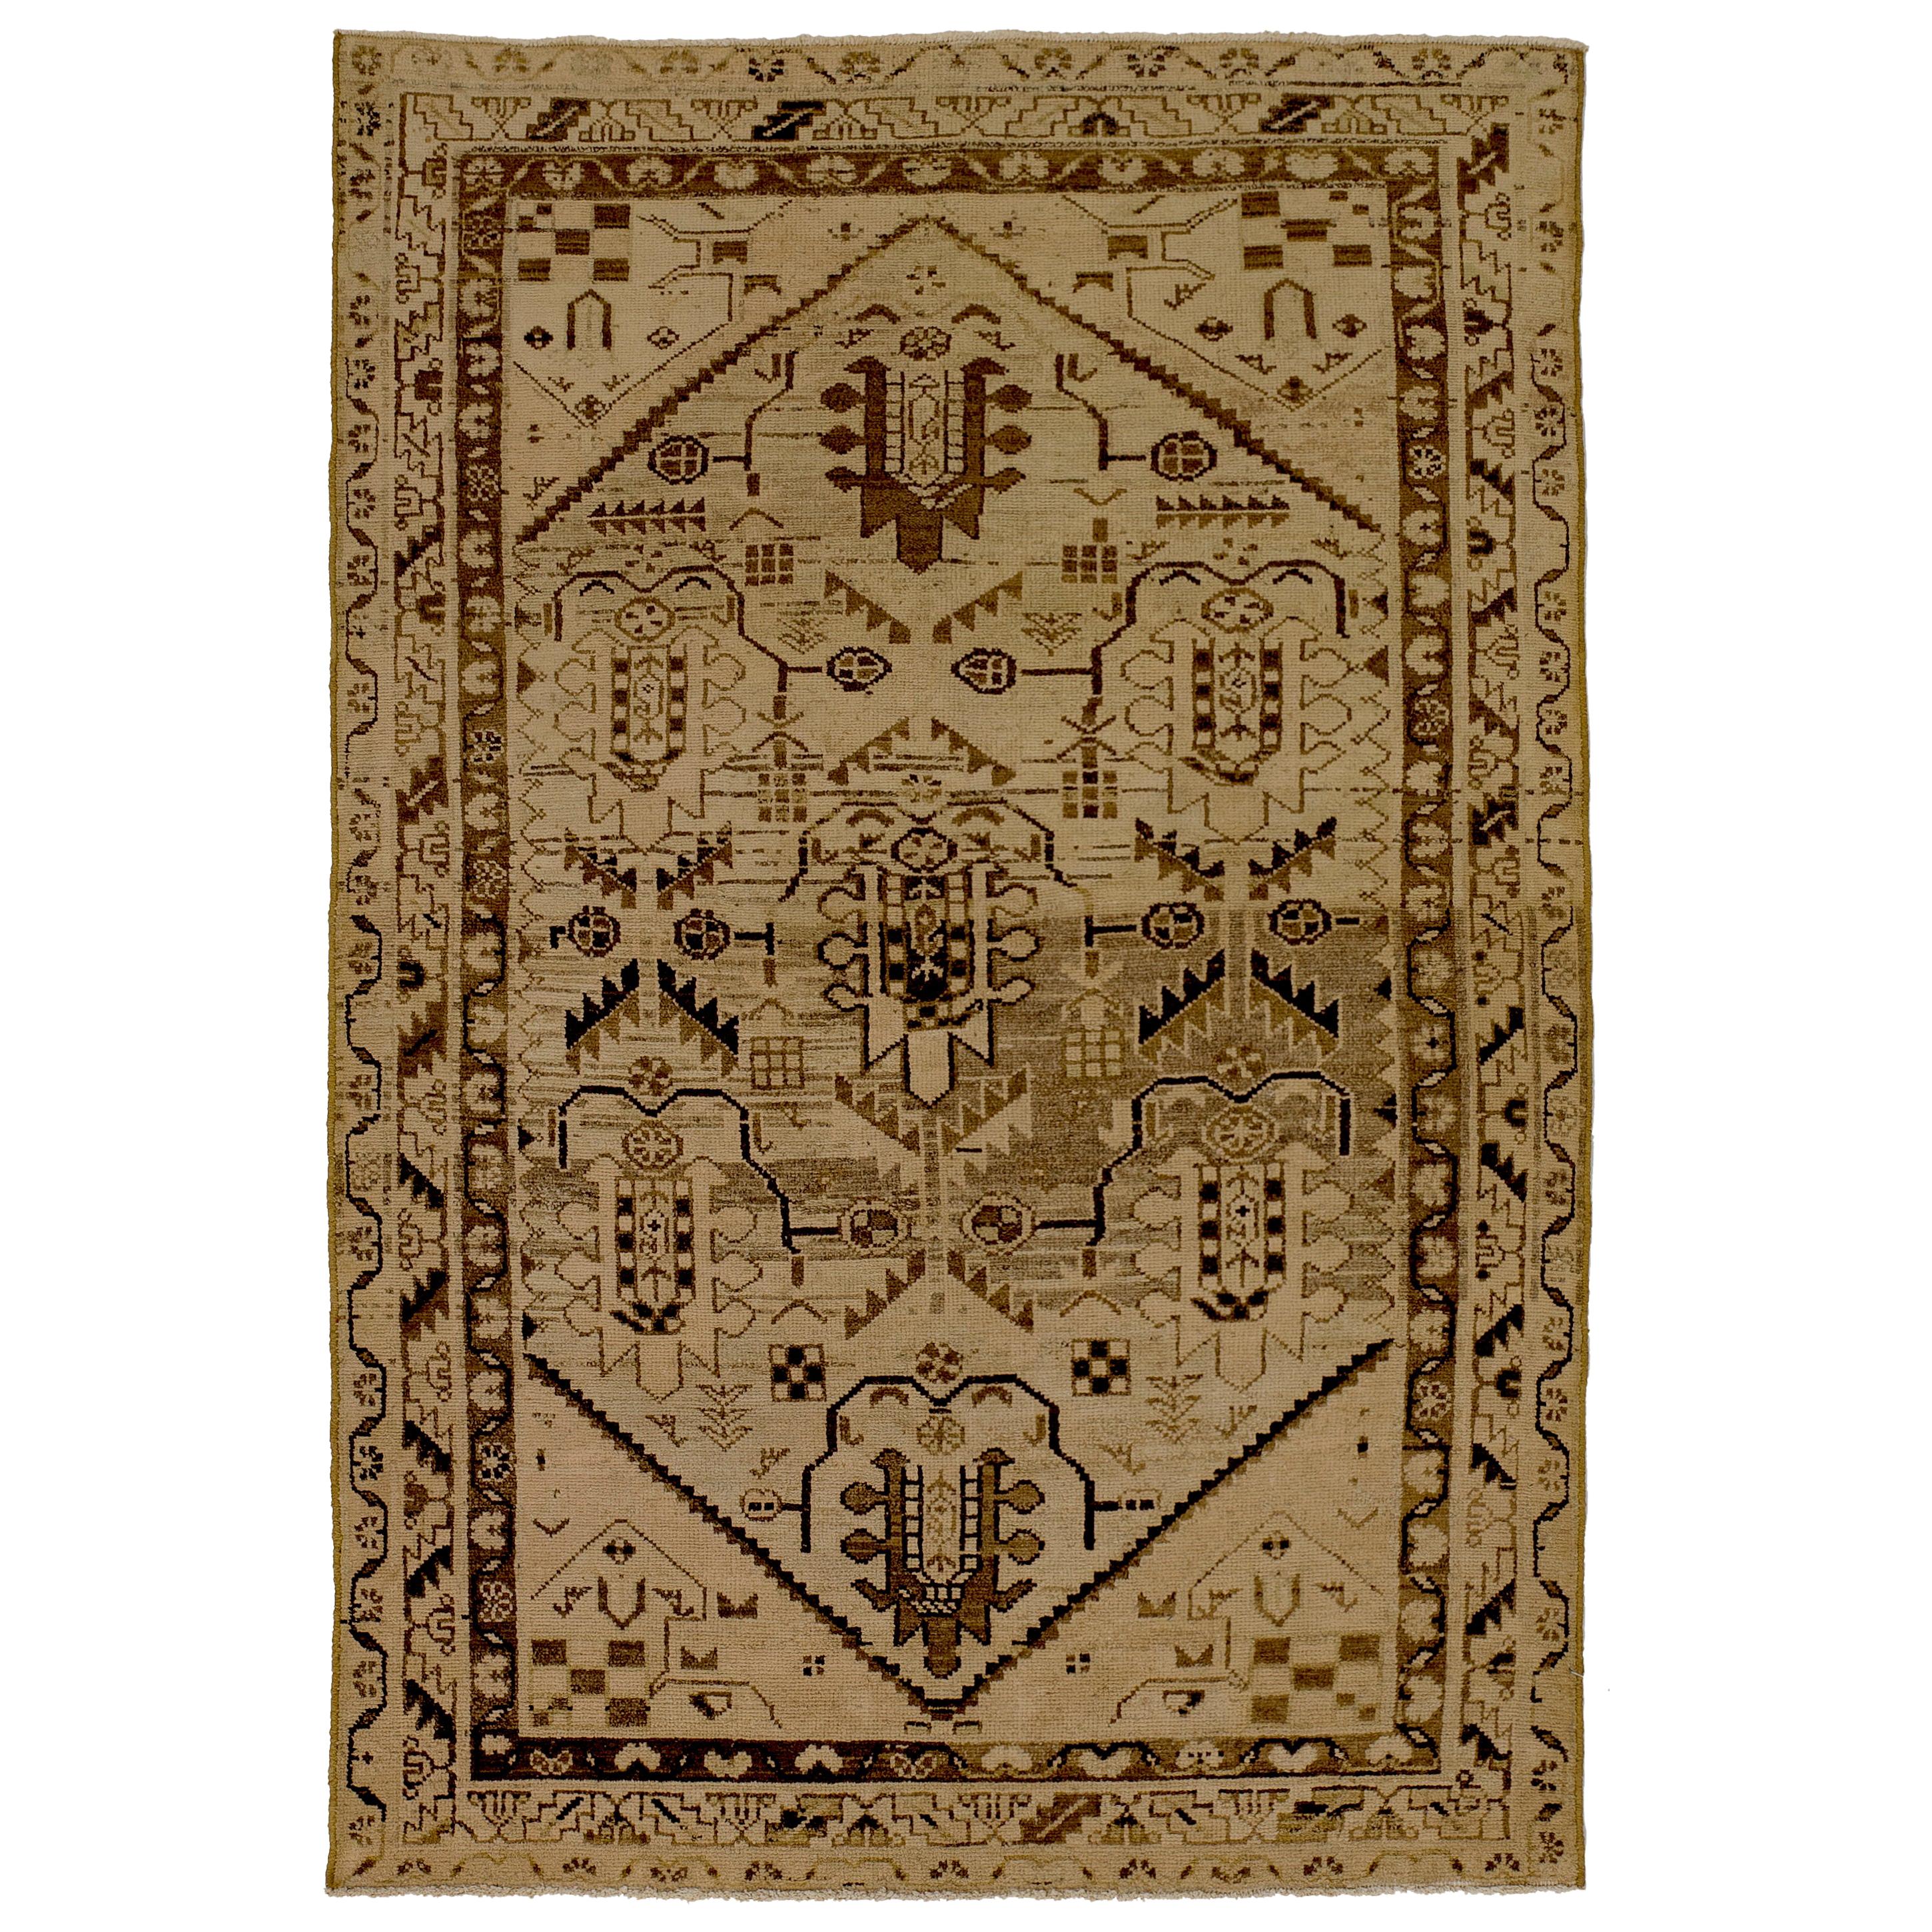 Antique Persian Malayer Rug with Tribal Details on Beige Field